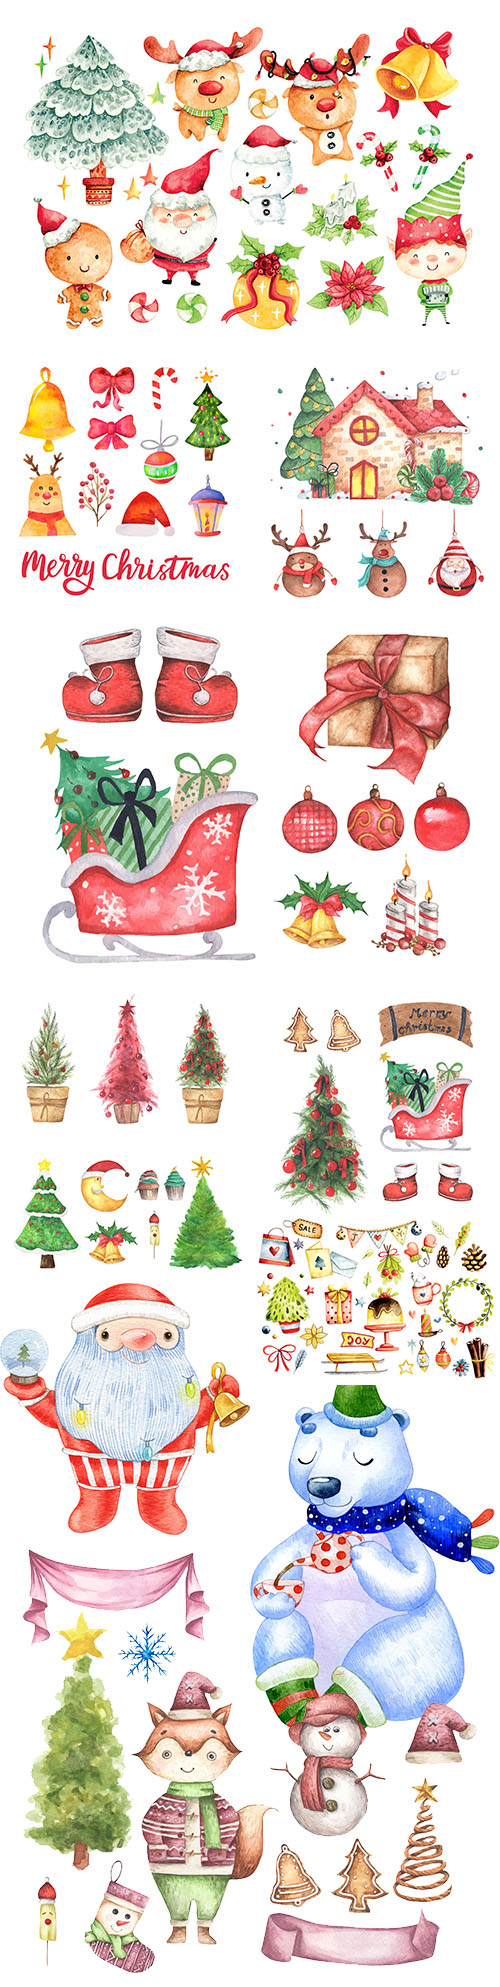 Set of Christmas decorations watercolor illustrations and elements
